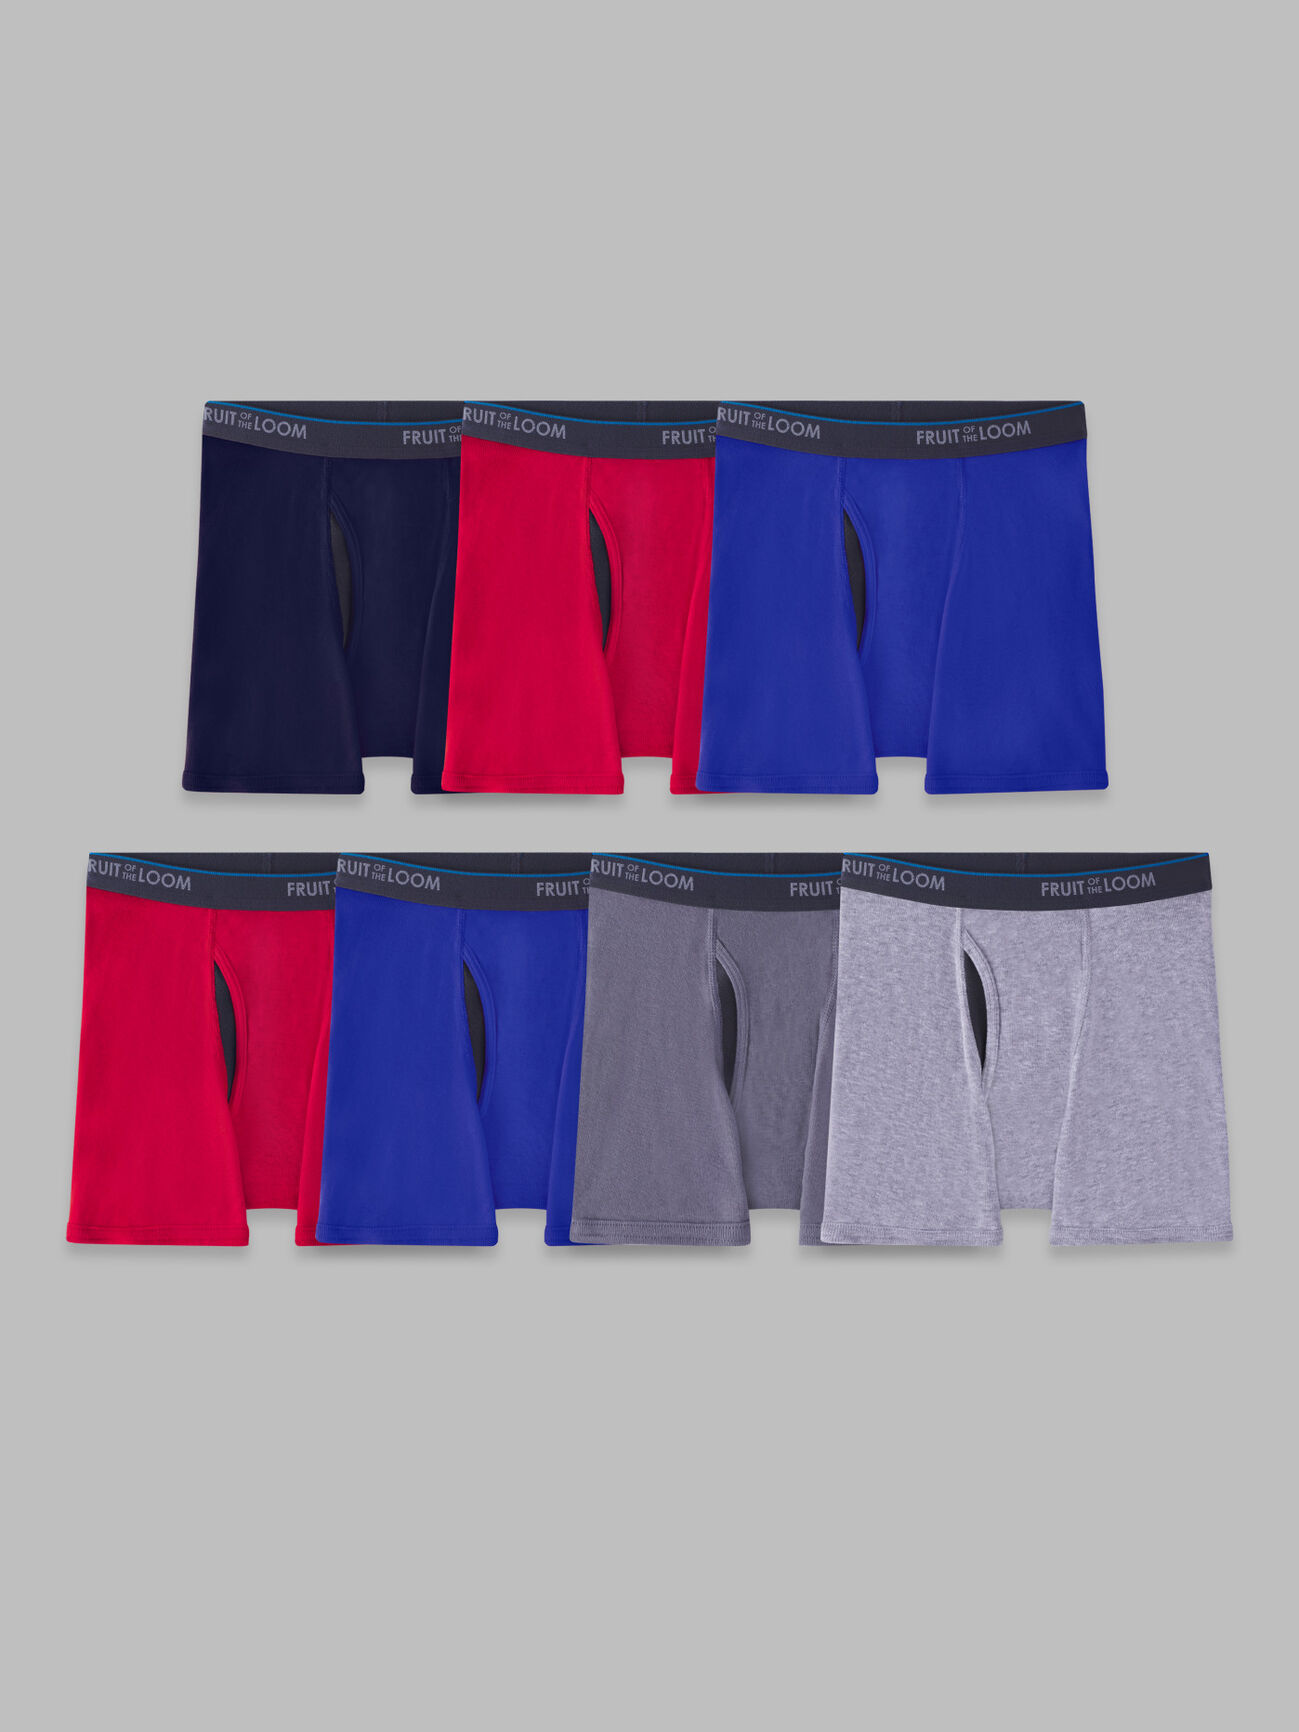 Toddler Boys'Eversoft® Boxer Briefs, Assorted 6 Pack